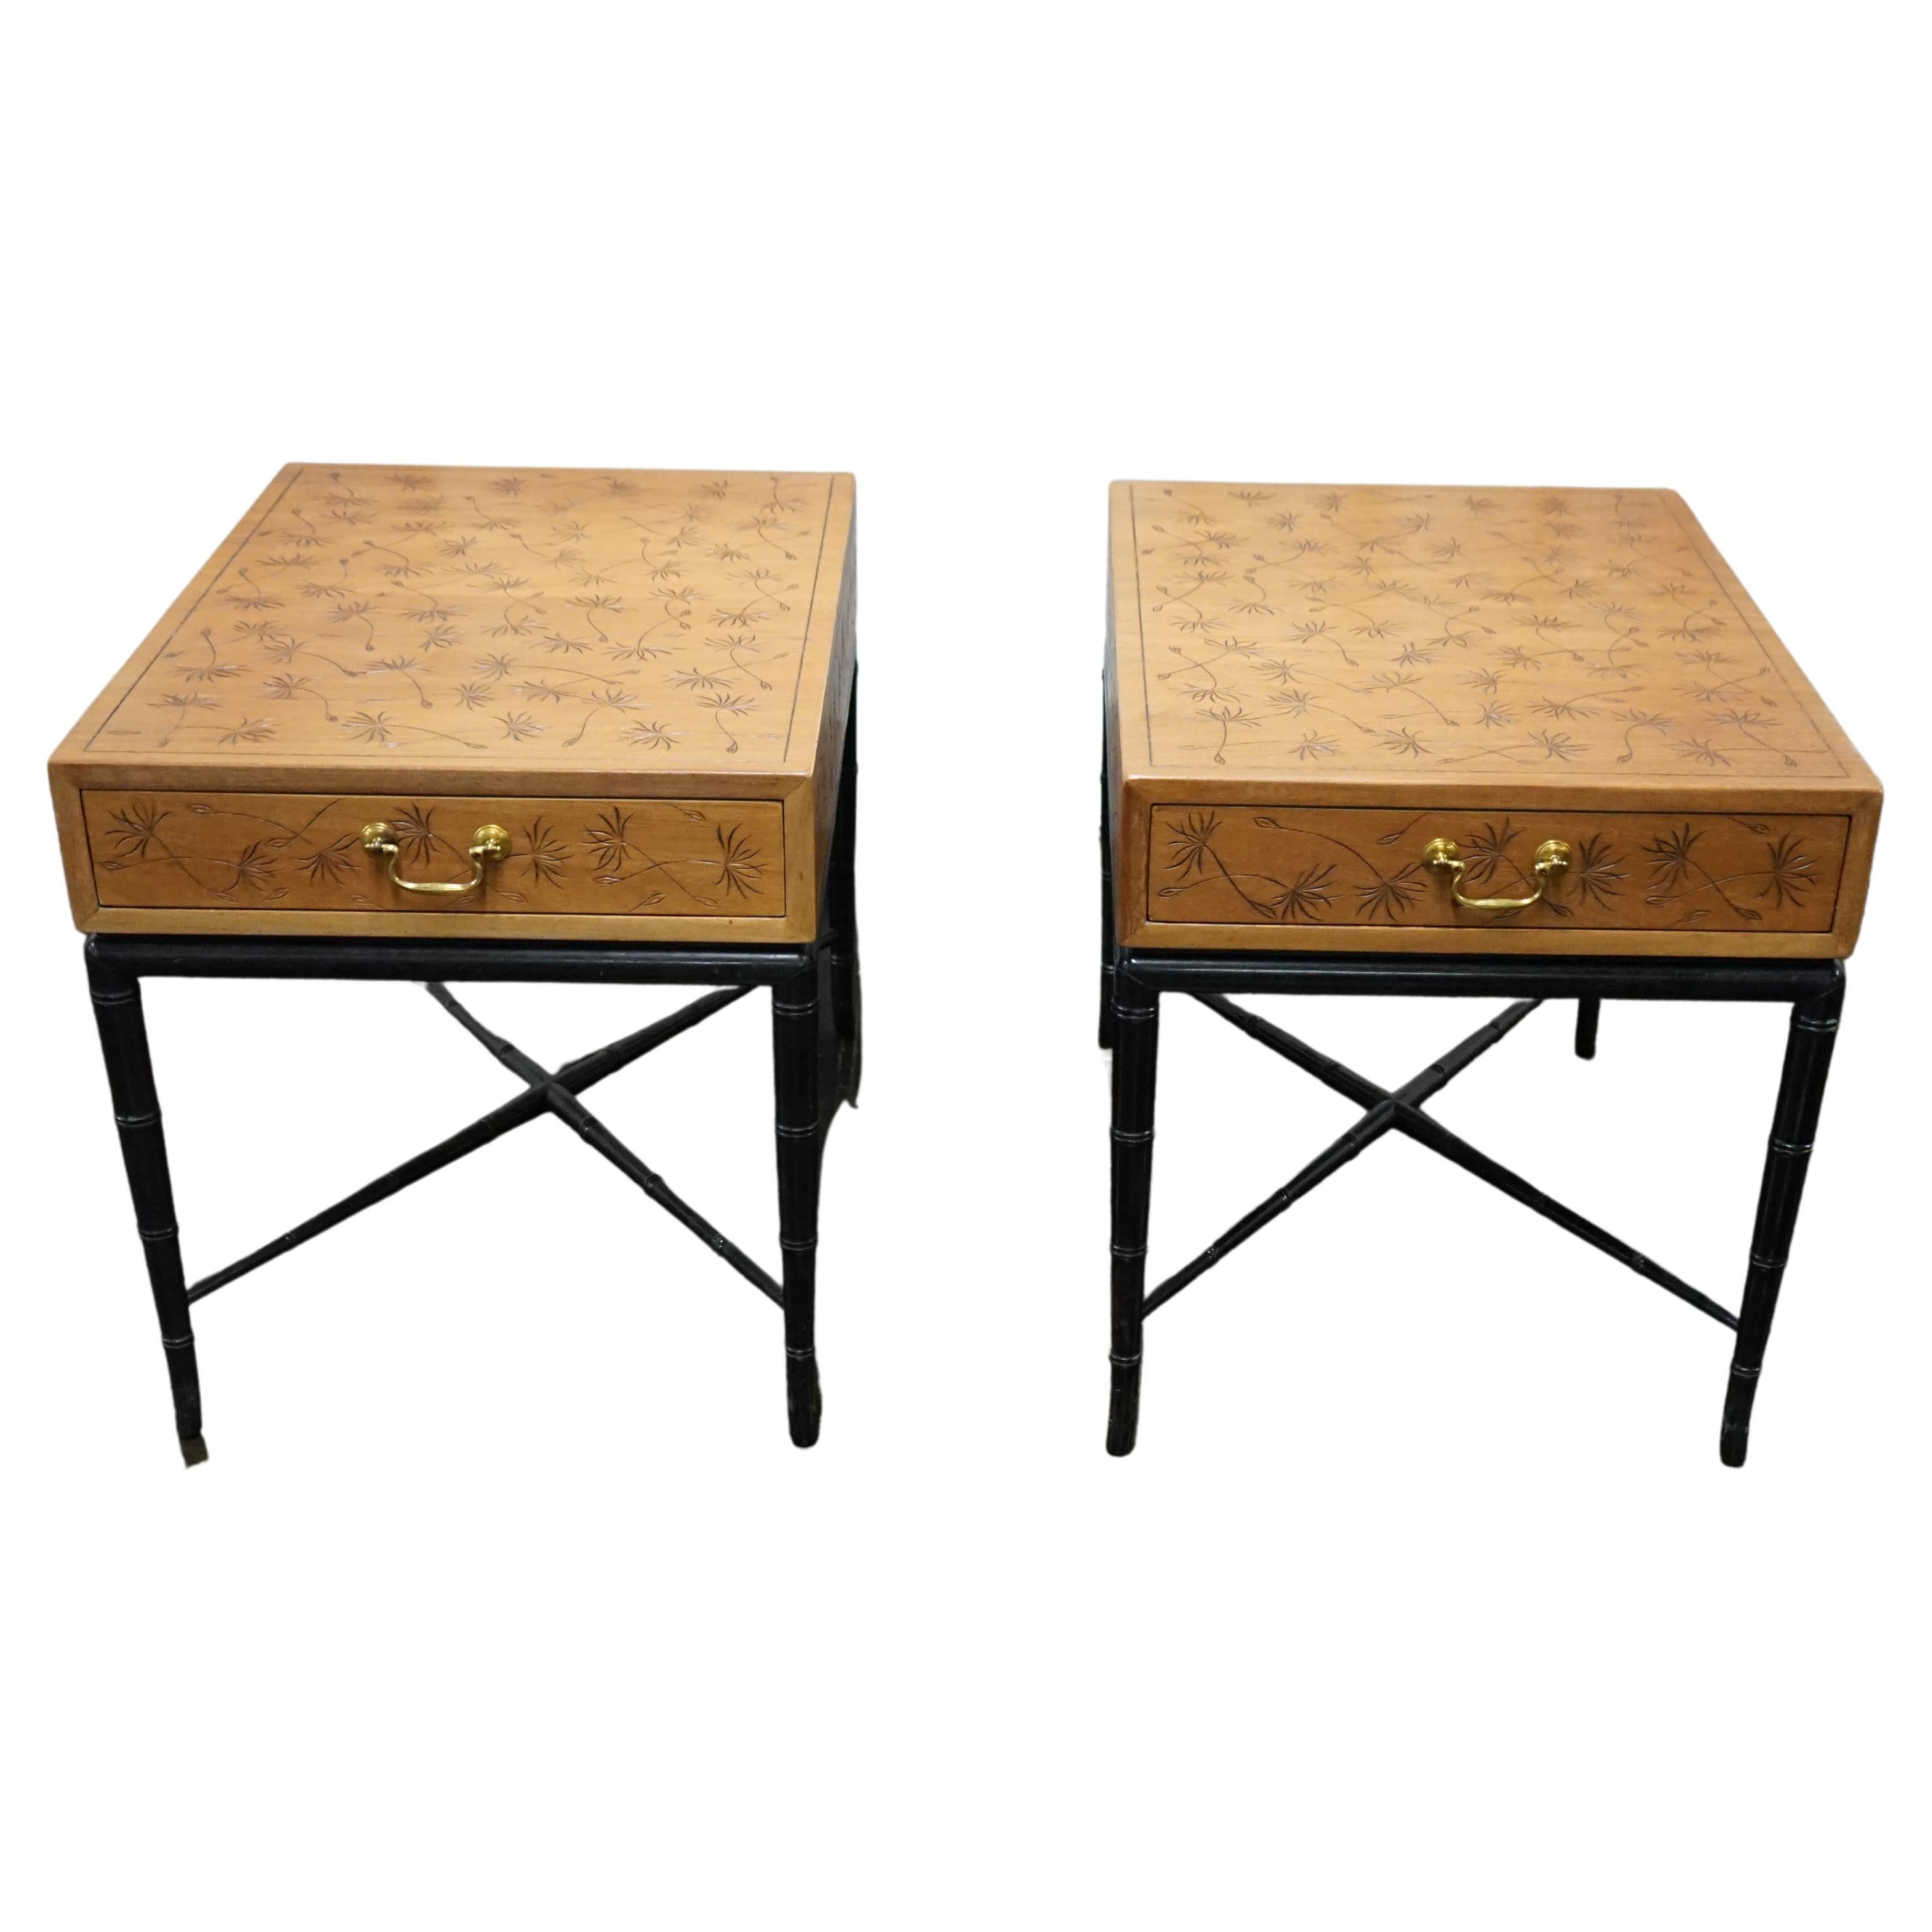 Pair of Midcentury Kittinger Side Tables with Drawers on Faux Bamboo Base For Sale